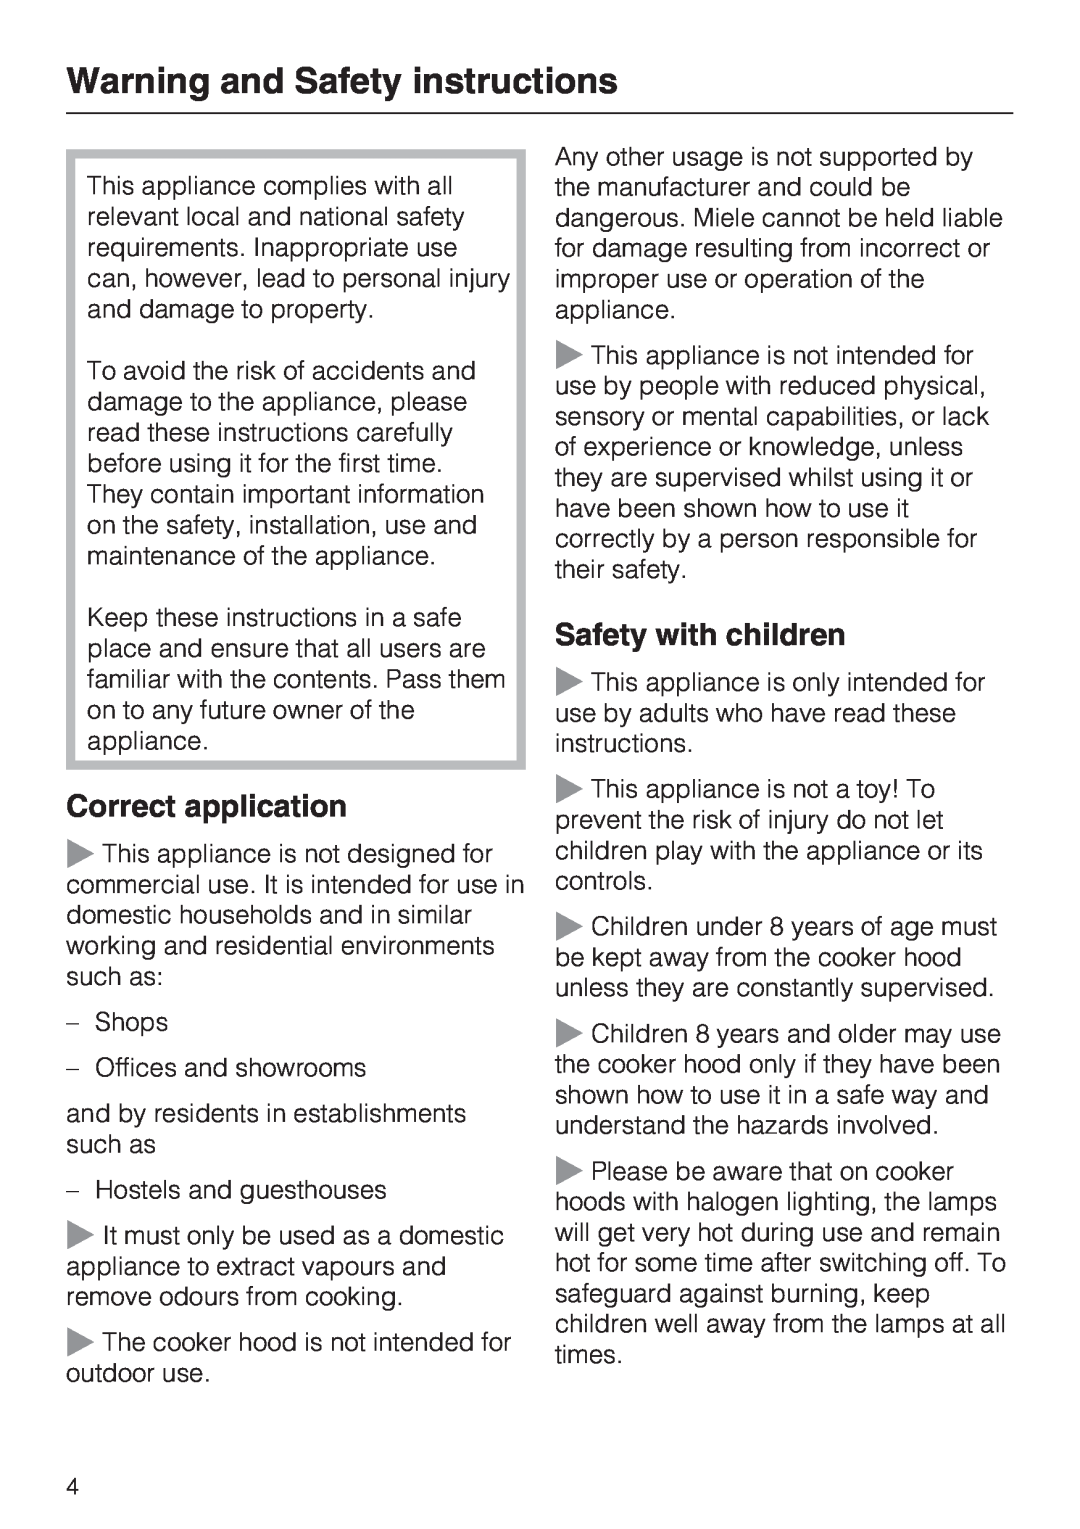 Miele DA 3590 EXT, DA 3560 EXT Warning and Safety instructions, Safety with children, Correct application 